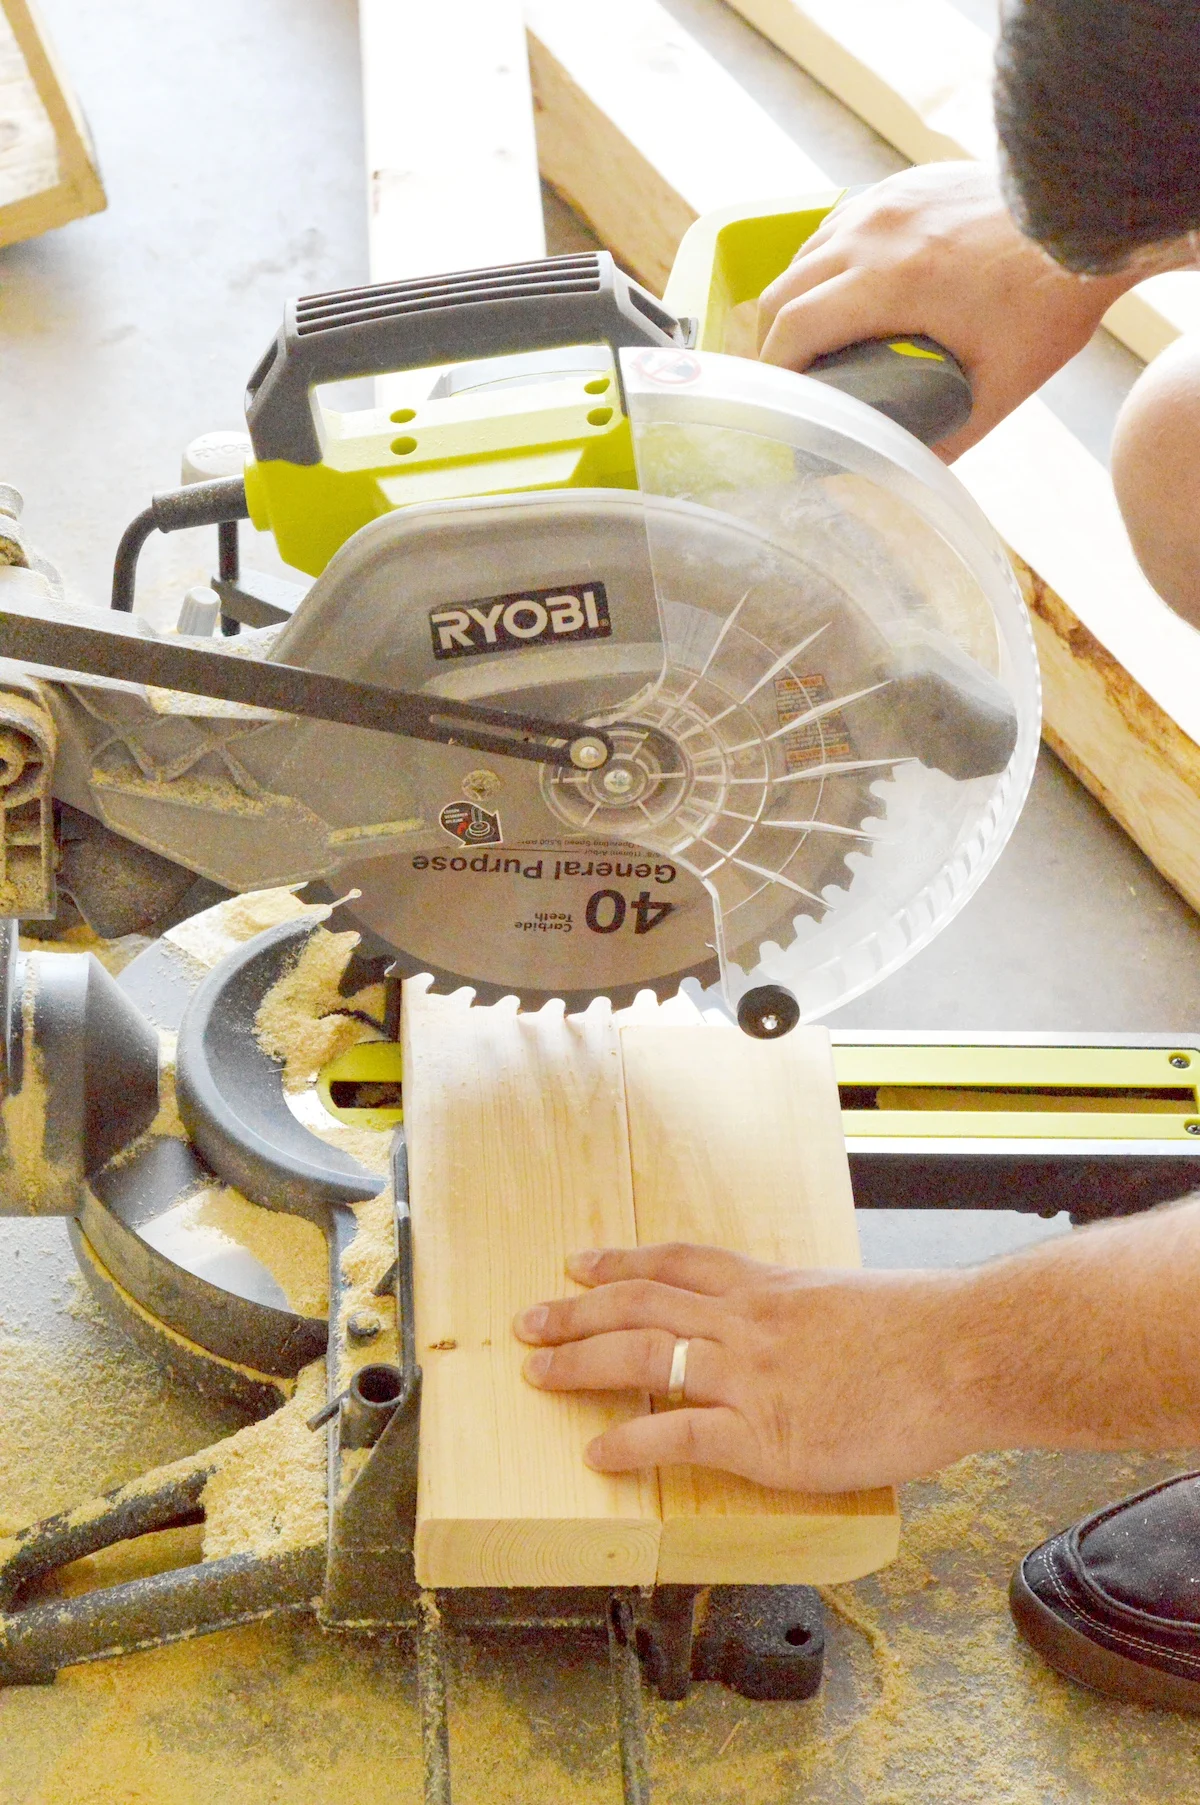 lowering the miter saw onto the wood